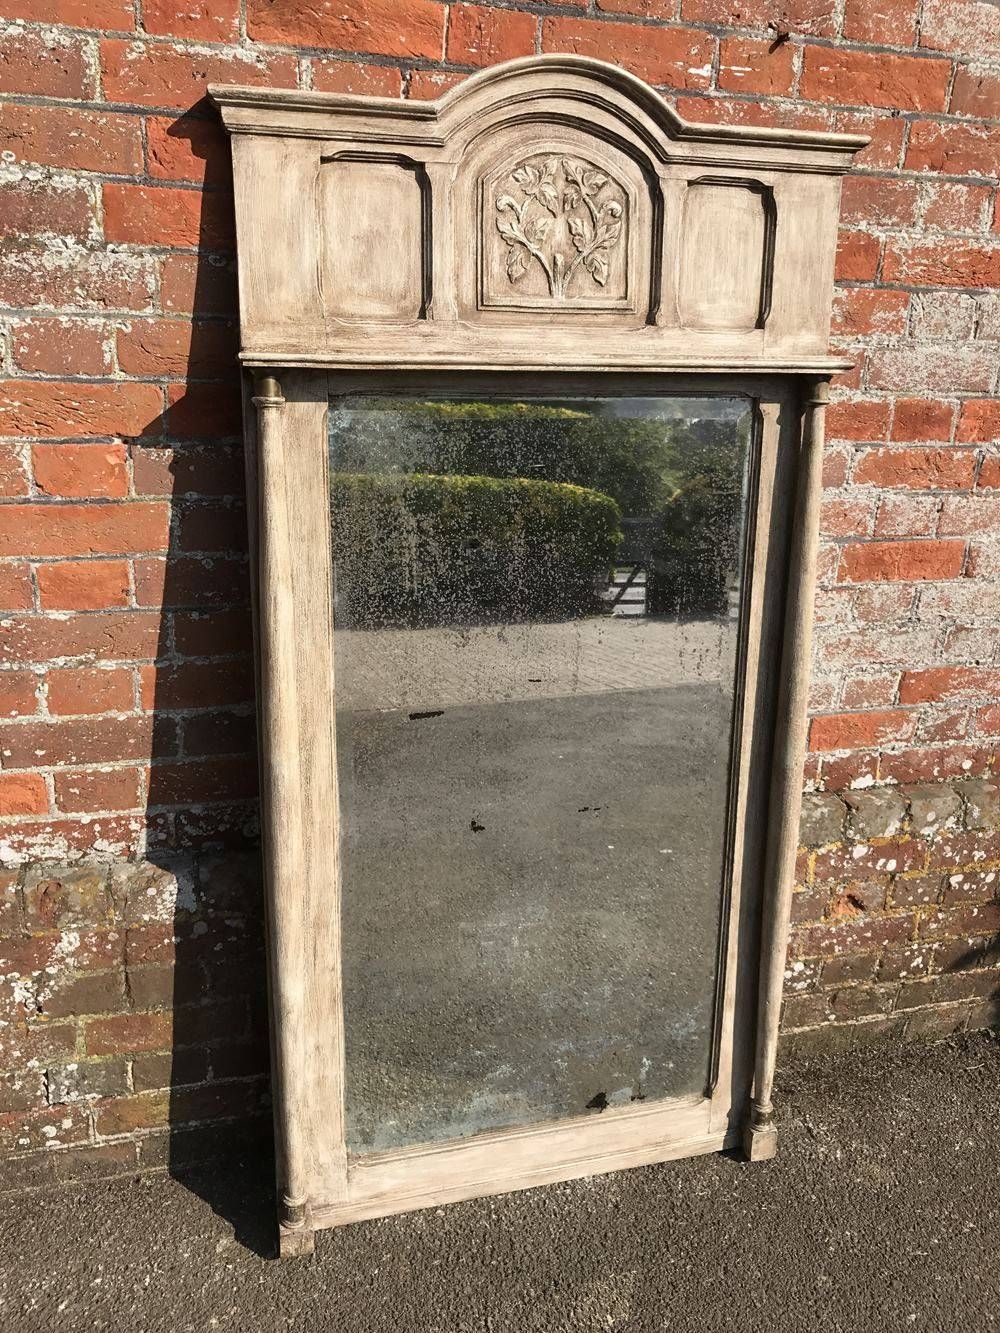 A Wonderful Large Antique 19th Century French Carved Wood Painted Intended For Antique French Mirrors (View 4 of 15)